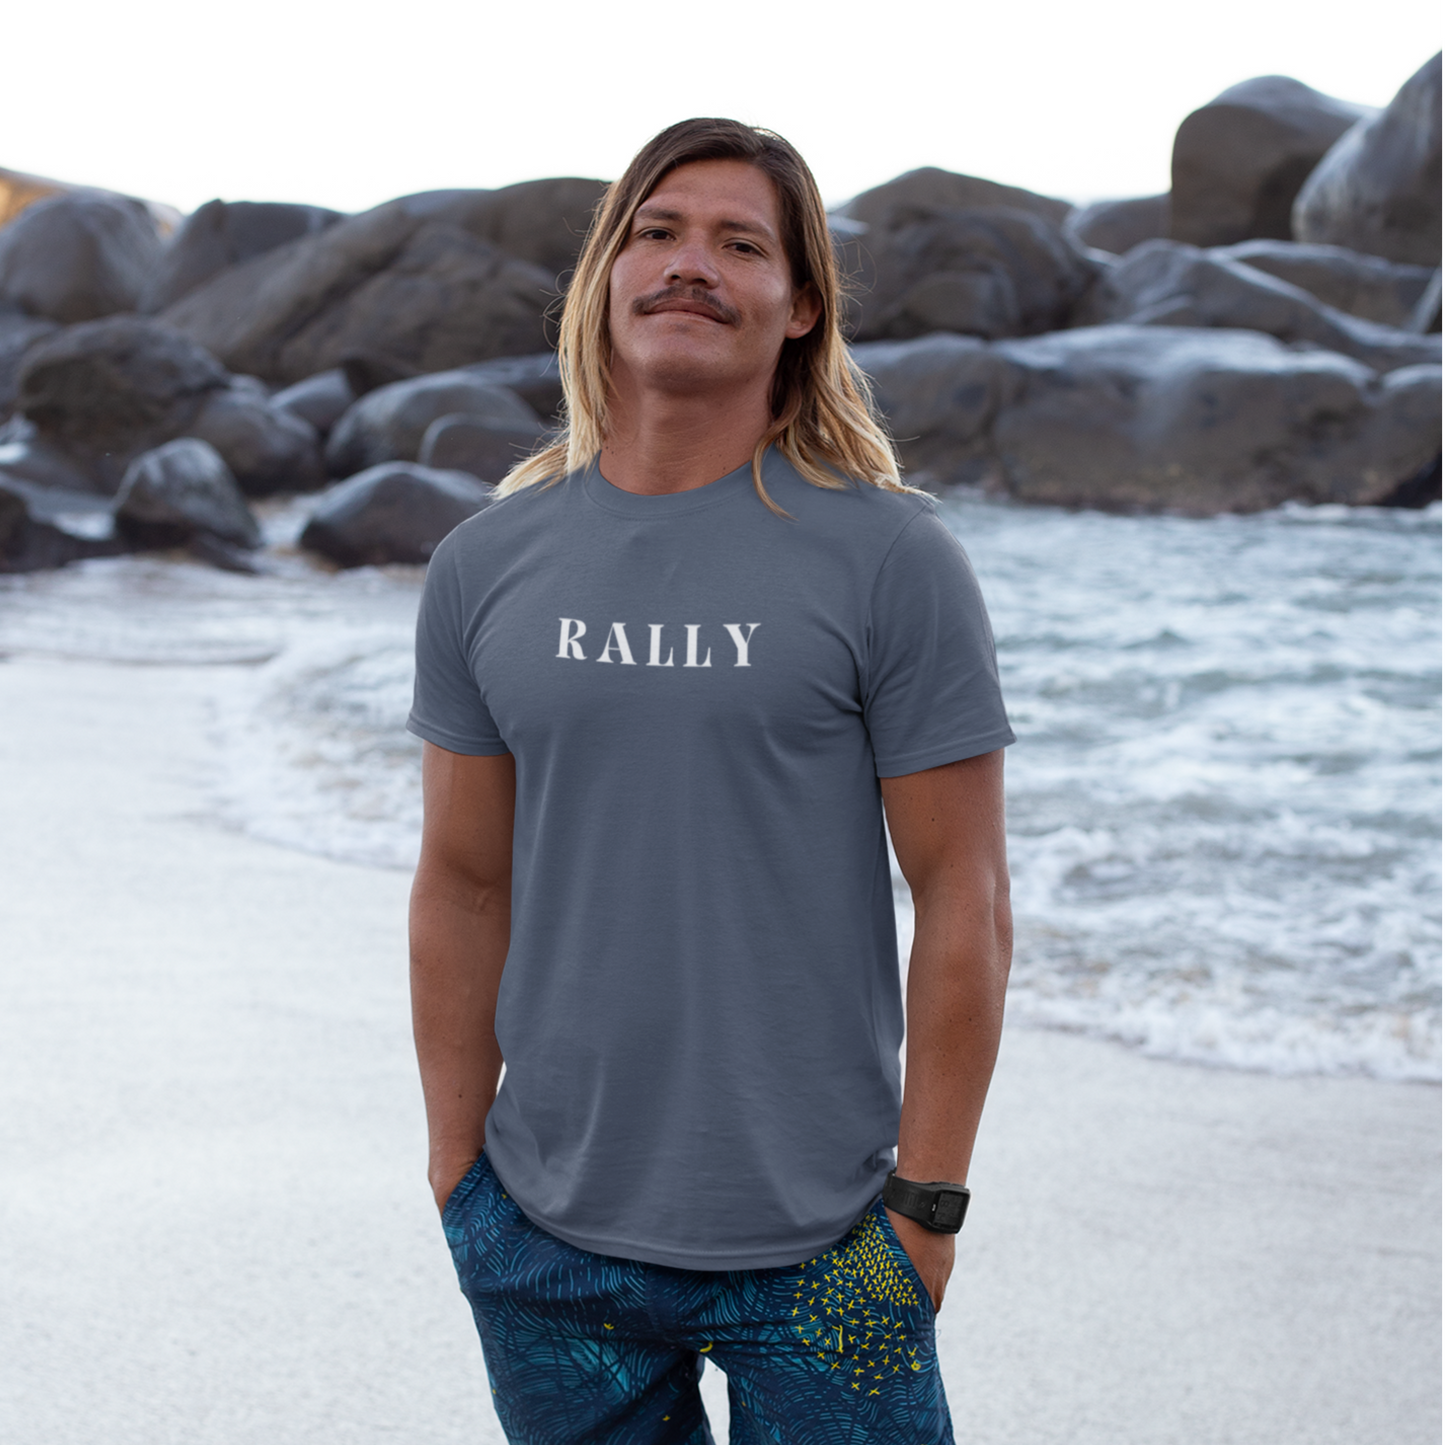 Rally inspirational word t shirts, tshirts that motivate, tee shirt gift for friends and family t shirts that encourage